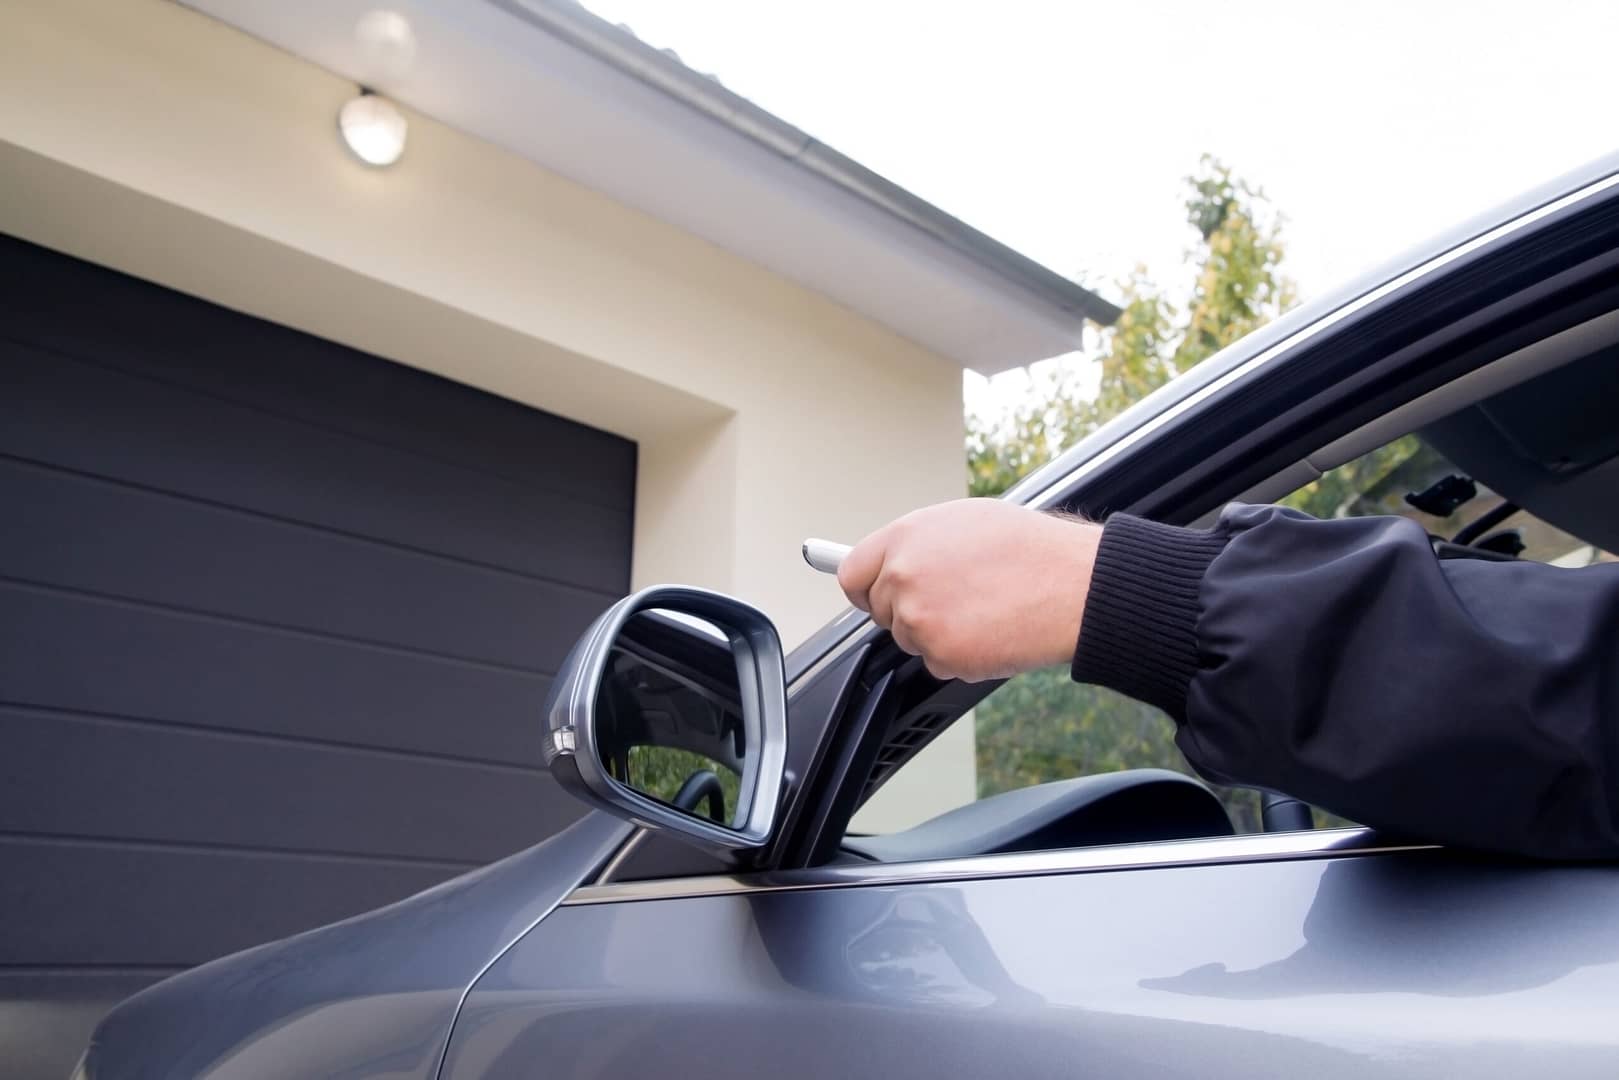 Person using a remote to open the garage door from inside a car.